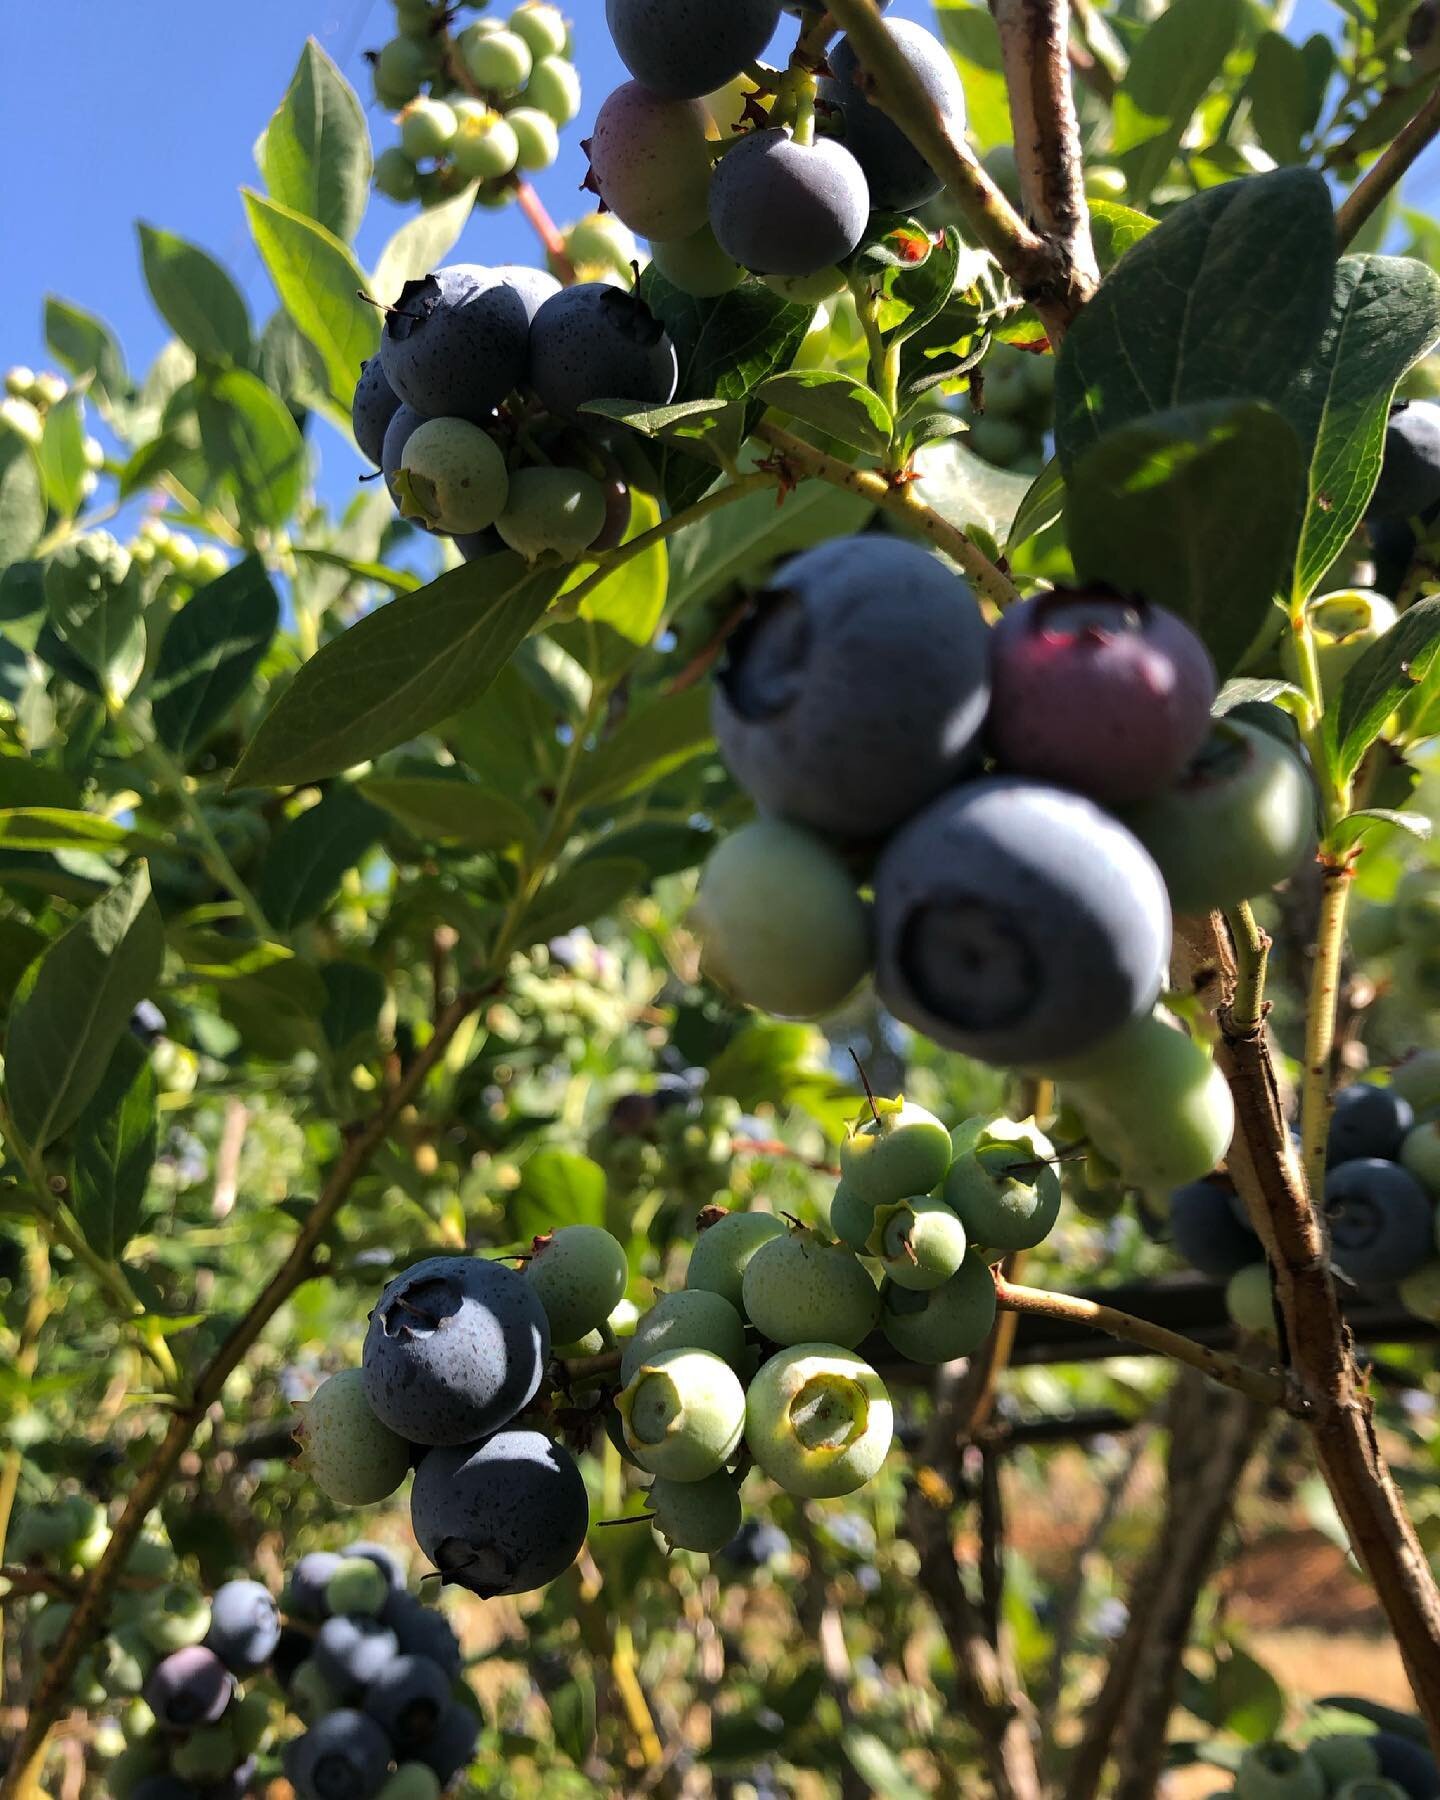 Went blueberry picking today for the first time &amp; I am in love! It was so much fun searching for perfect giant &amp; crunchy blueberries, so now we have curated the most ideal handful! 👌🏼Our bag got so heavy but it was such a reasonable price (